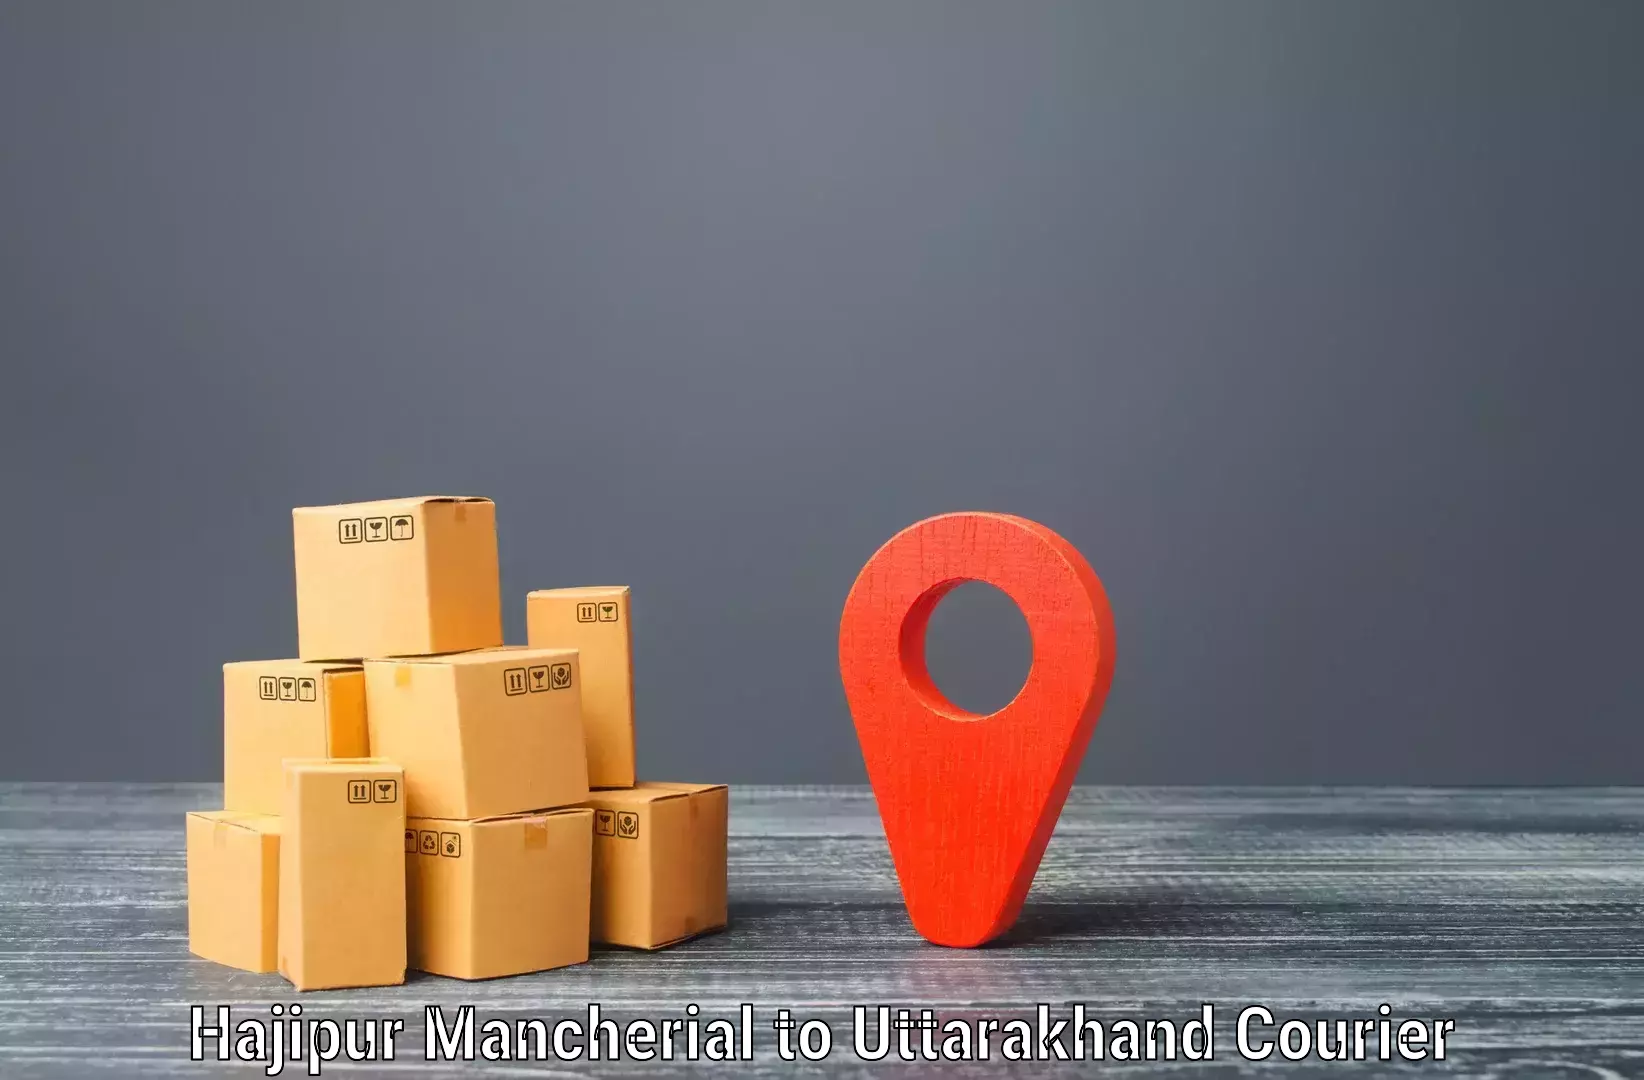 International courier rates Hajipur Mancherial to Mussoorie